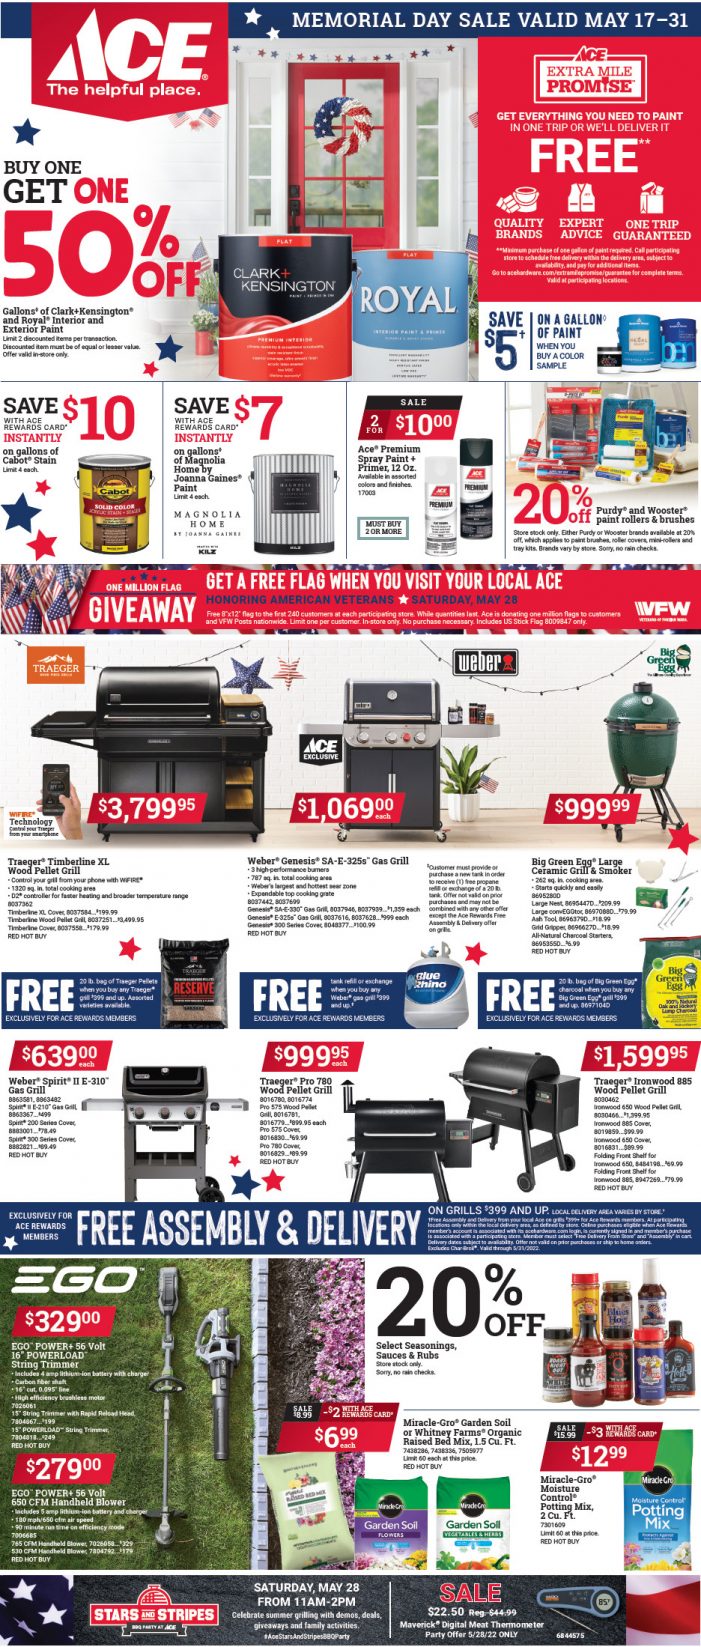 Your May Ace Memorial Day Specials from Sender’s Ace Hardware